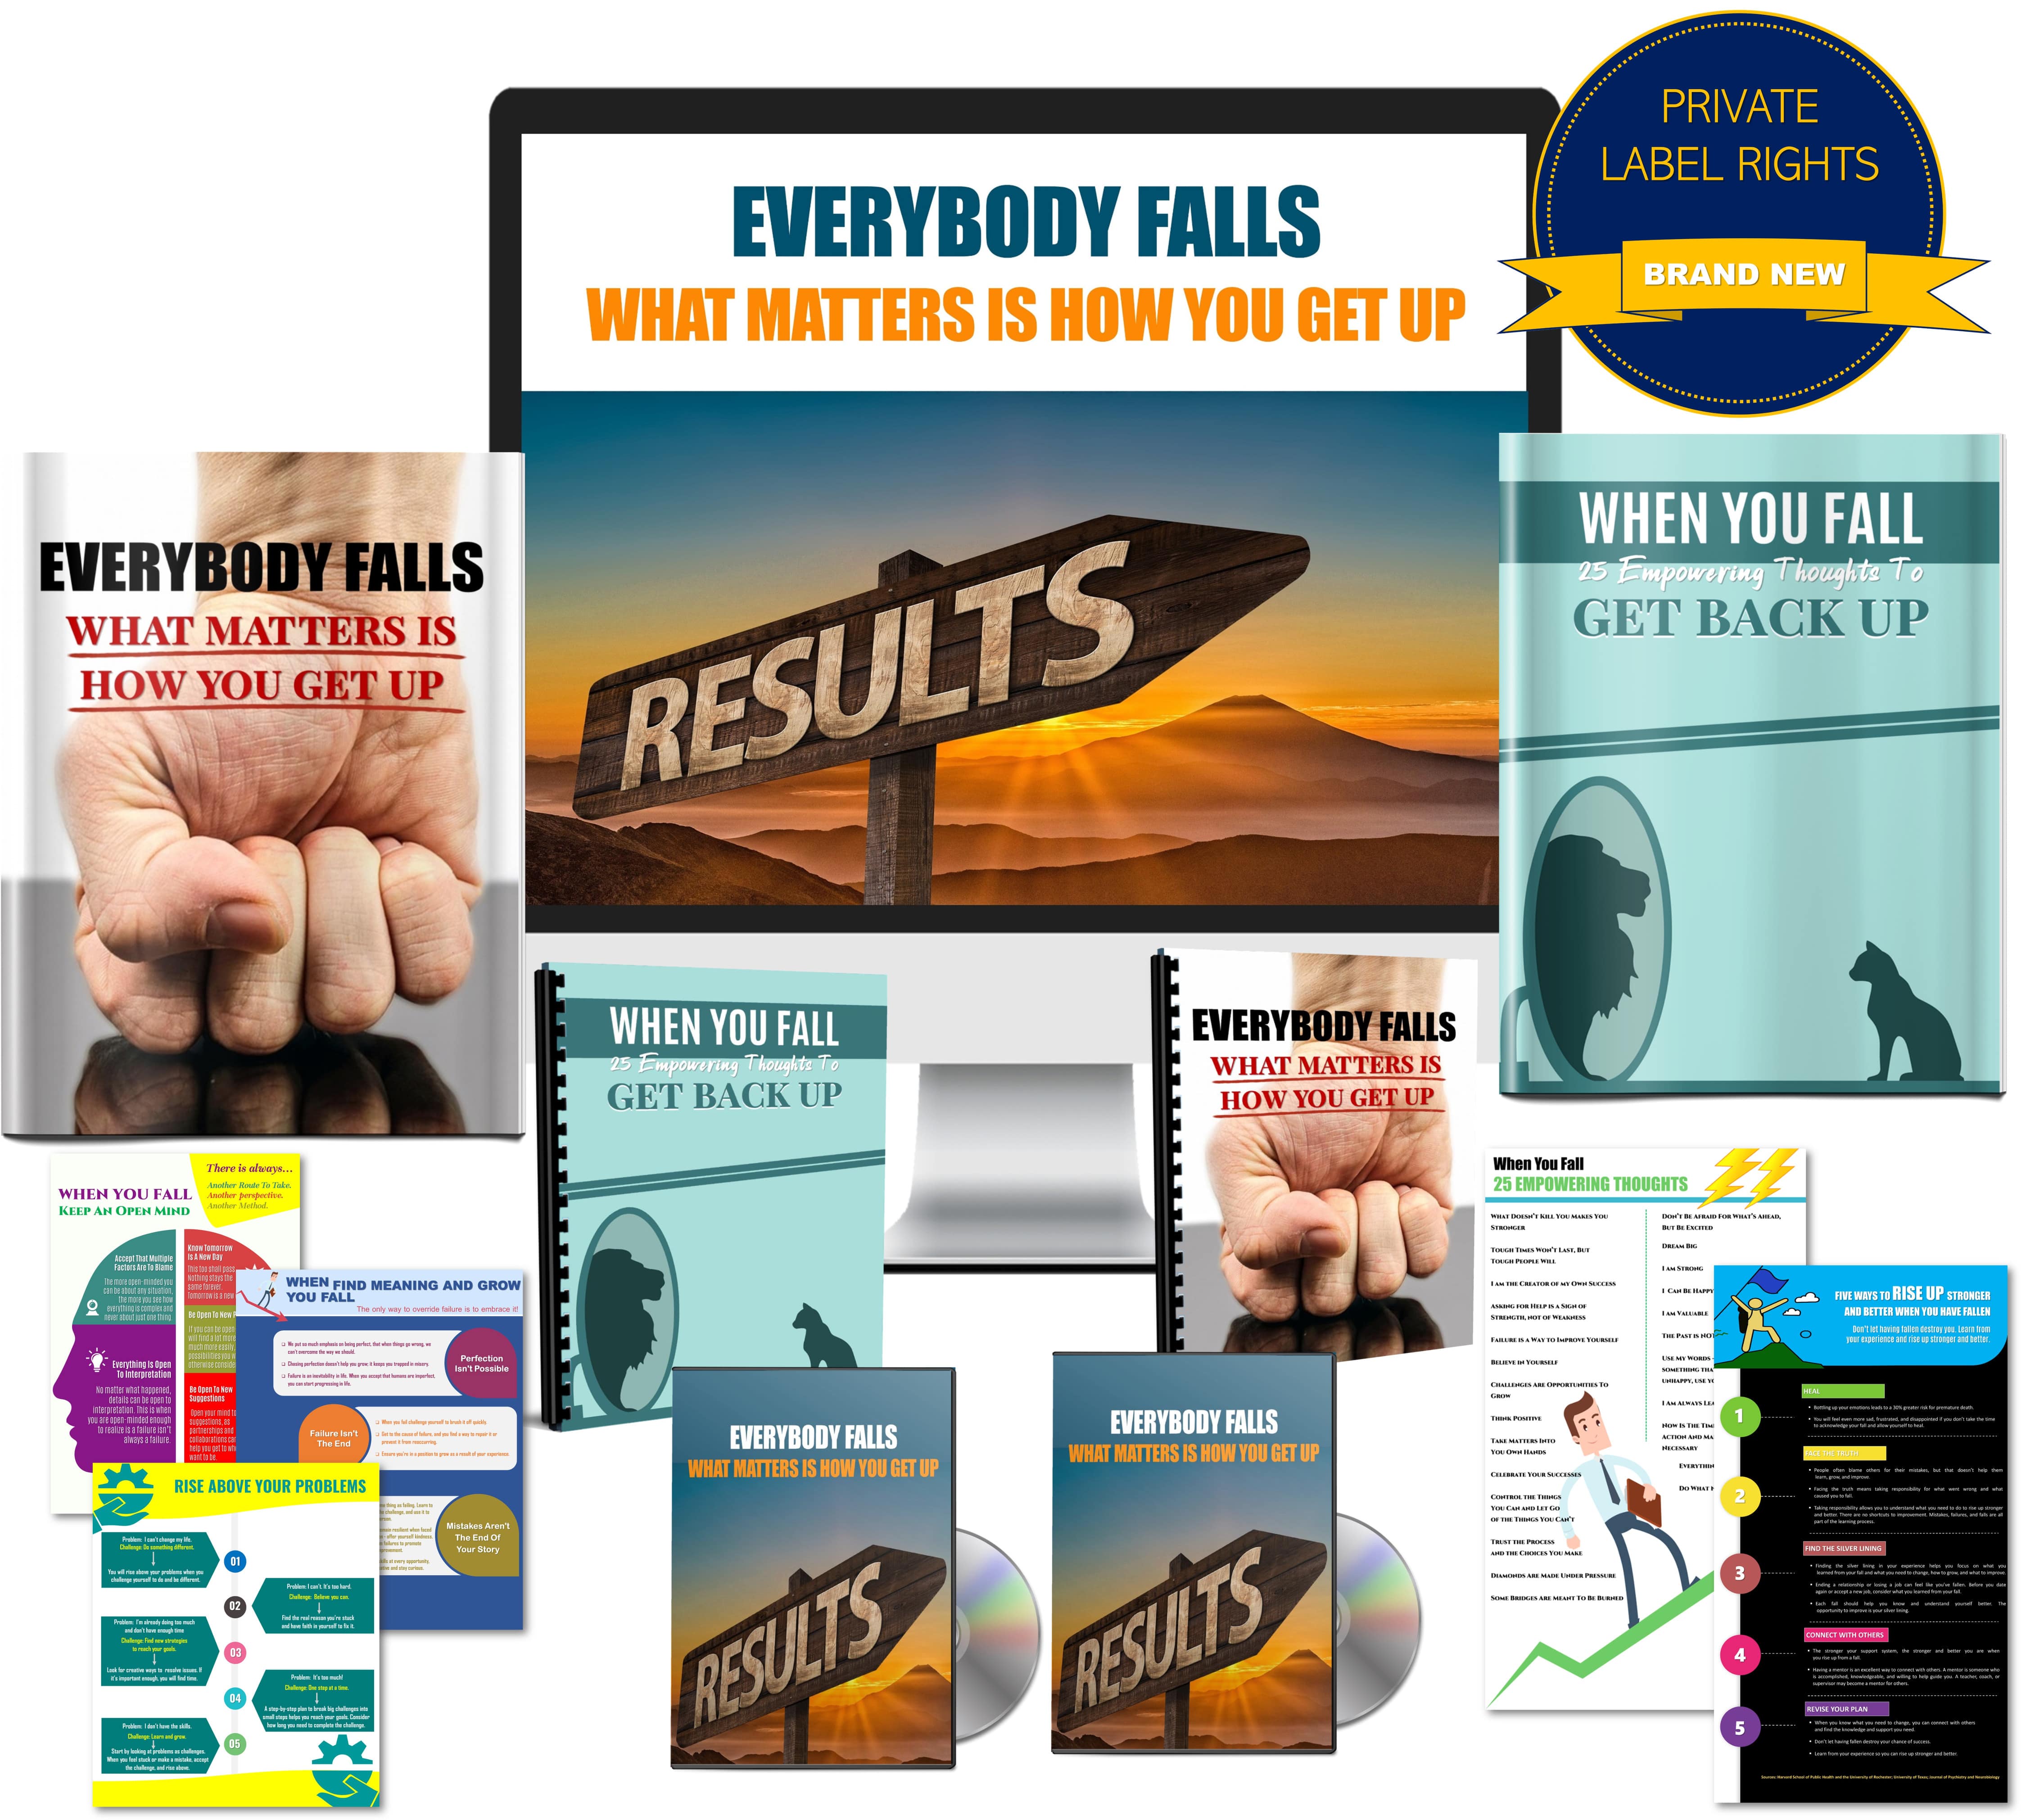 Everybody Falls What Matters Is How You Get Up with PLR Rights